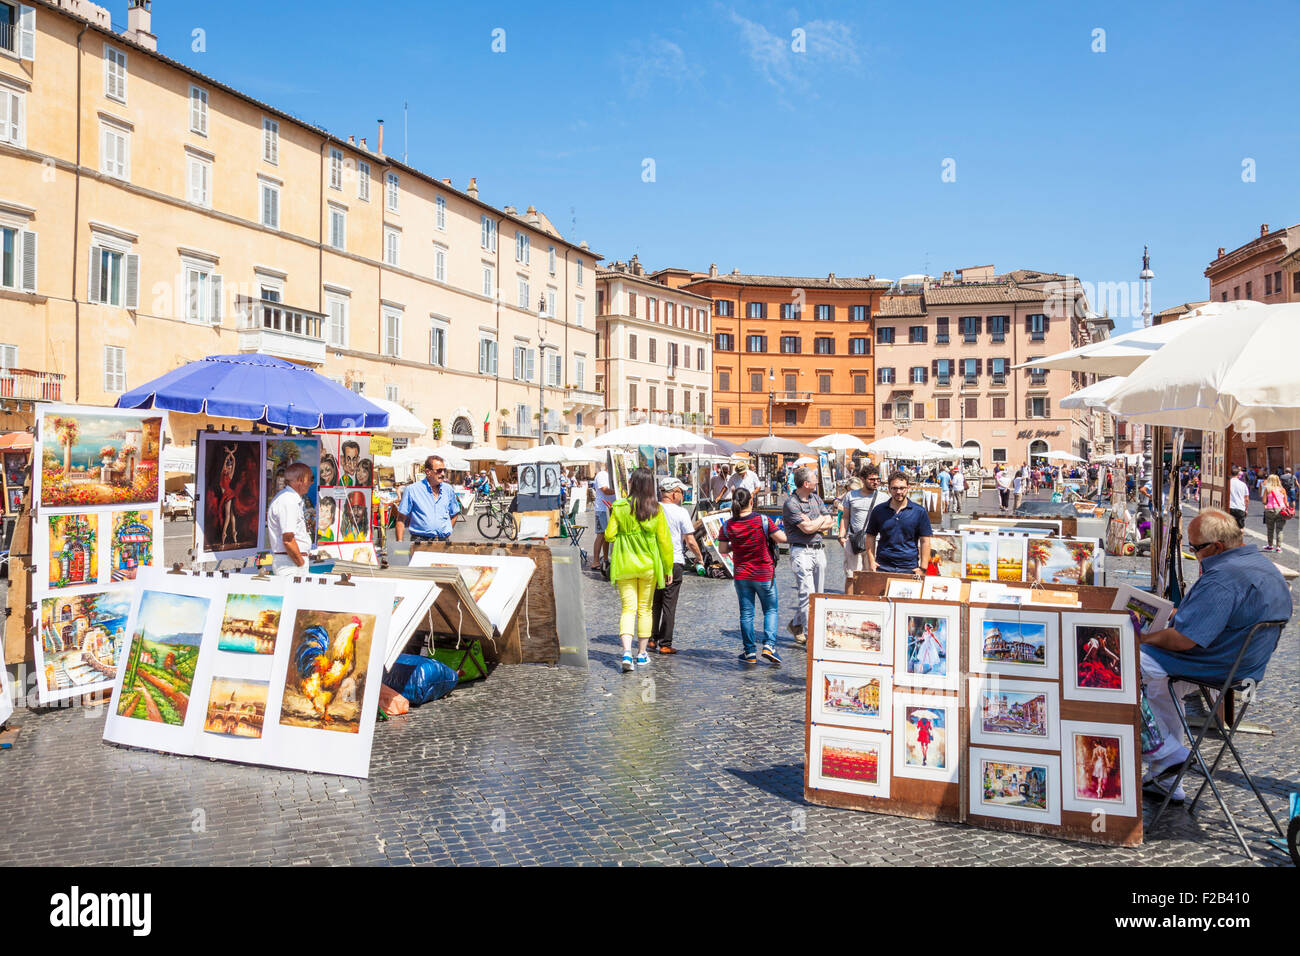 Artists painting and selling artwork in the Piazza Navona Rome italy Roma lazio italy eu europe Stock Photo